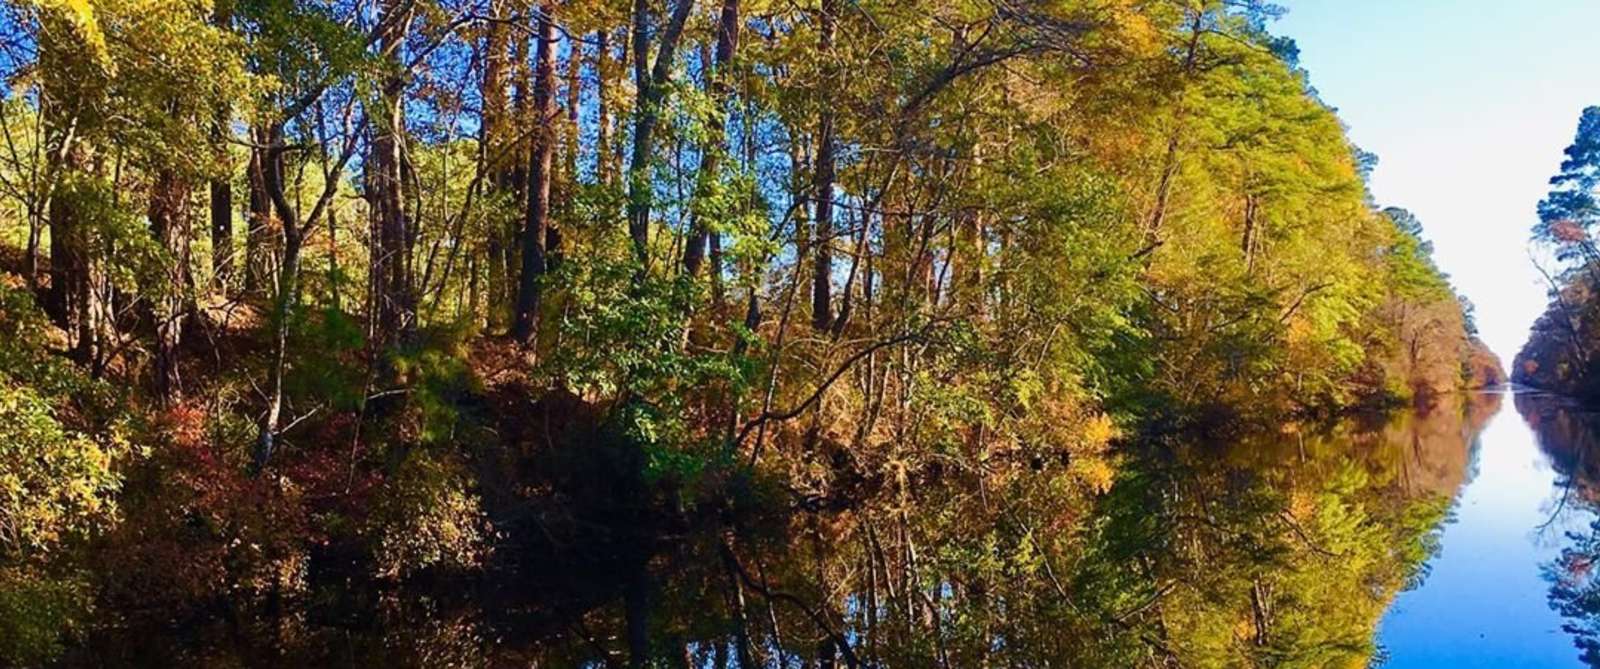 Trees reflect on the water of the Dismal Swamp Canal near Chesapeake, VA